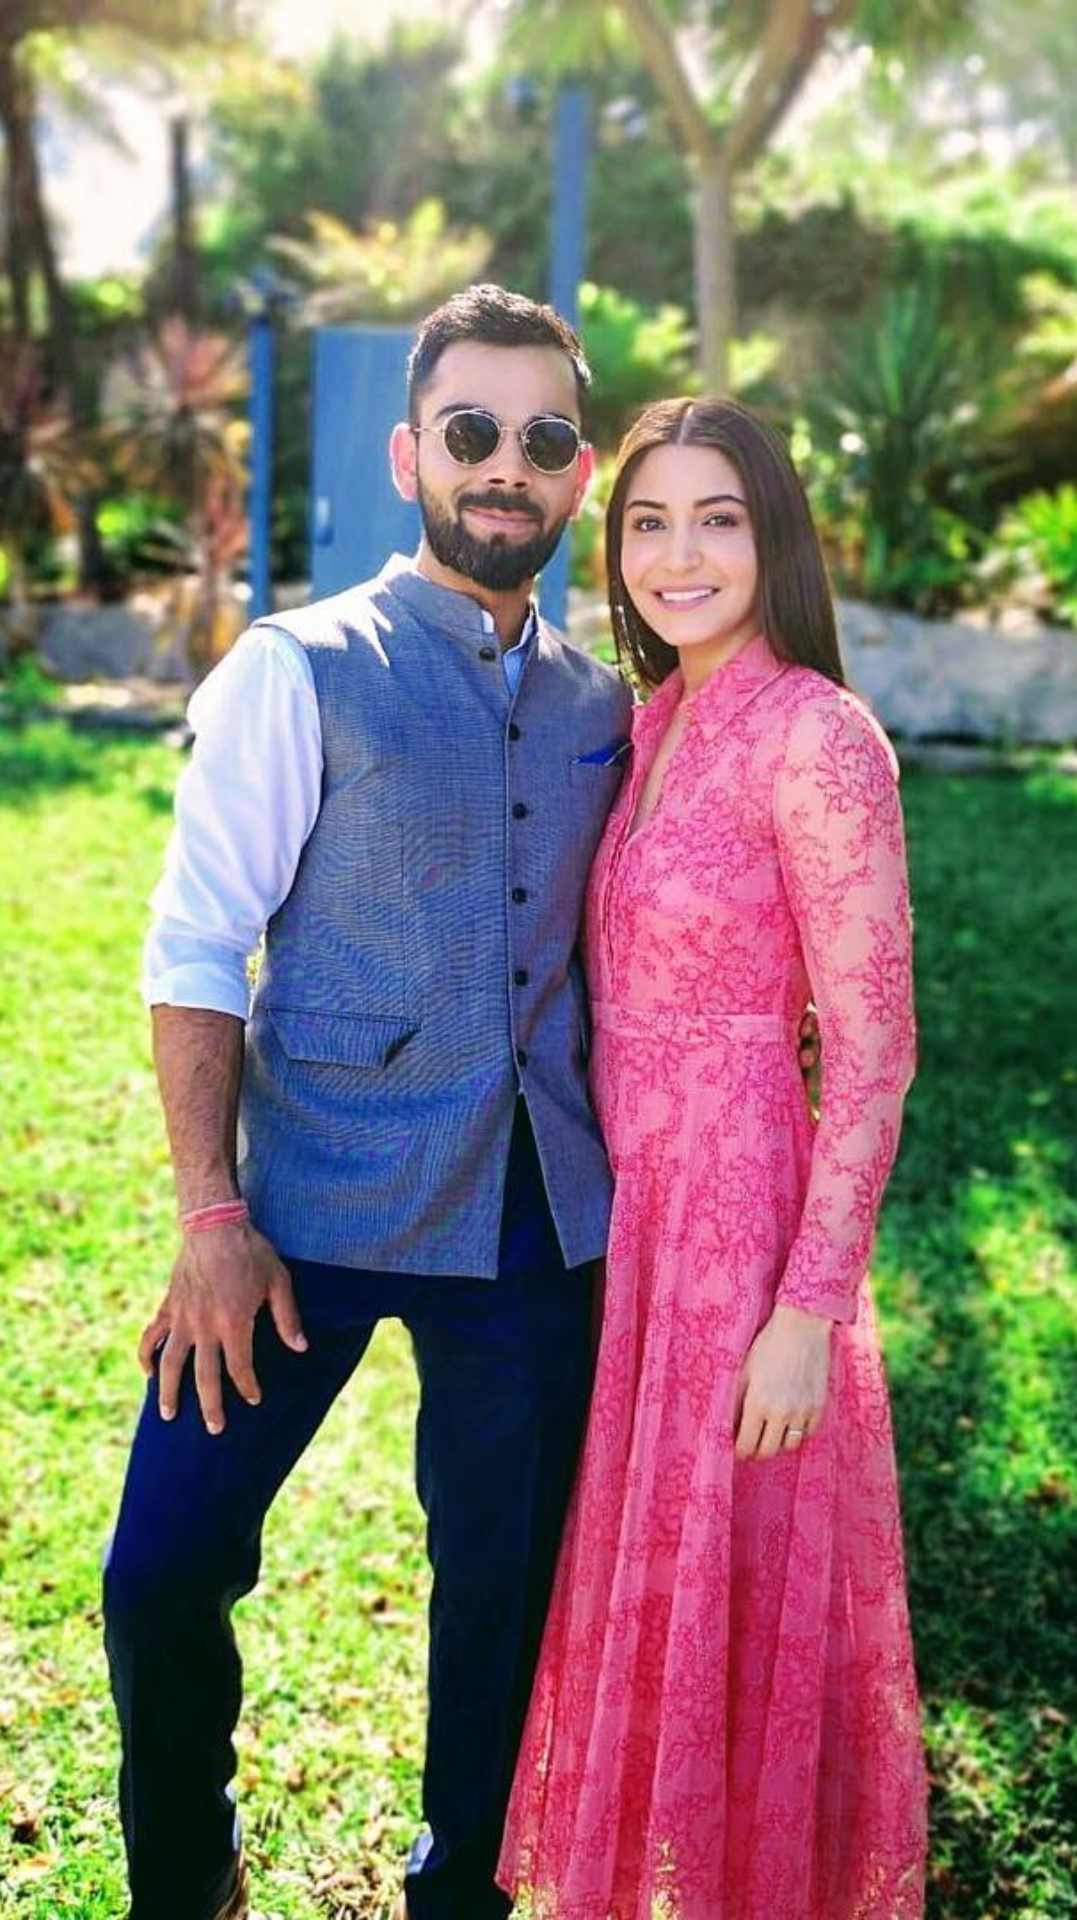 Are Virat and Anushka the best couple? - Quora